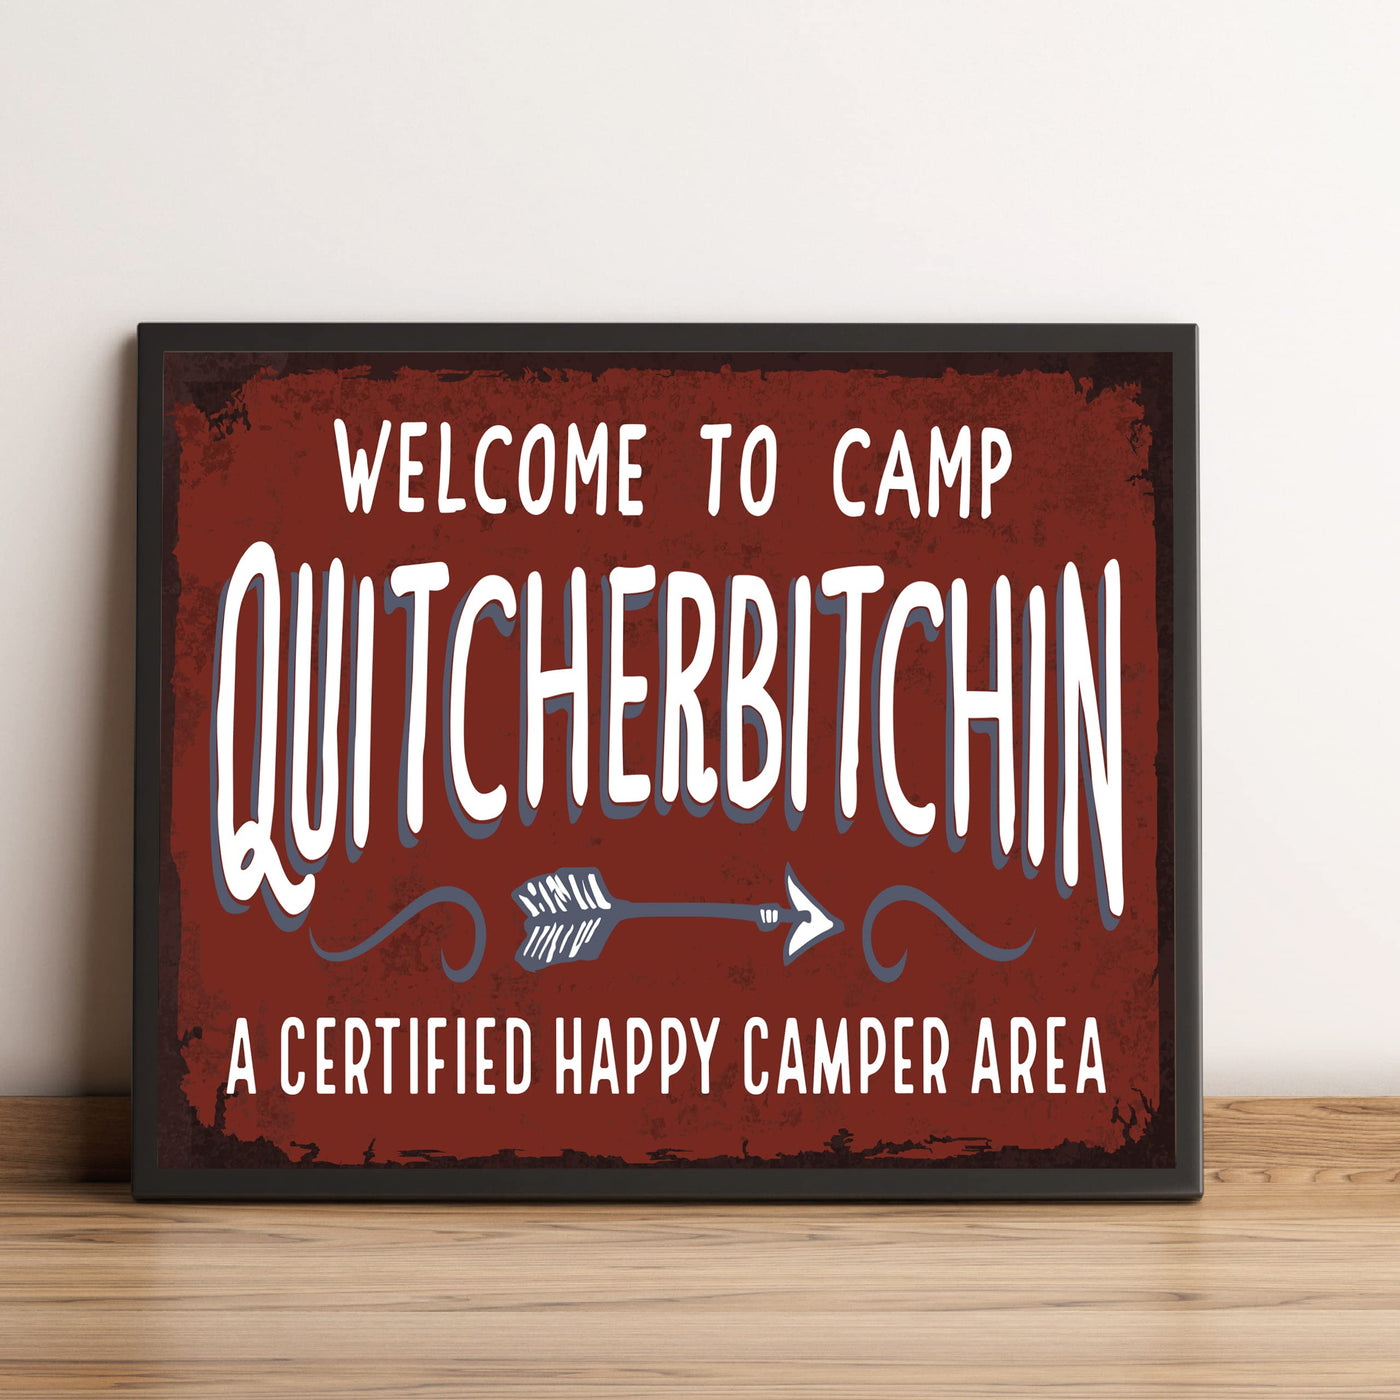 Welcome to Camp Quitcherbitchin-Funny Cabin & Lodge Wall Art Sign -10 x 8" Rustic Great Outdoors Print -Ready to Frame. Home-Lake-Beach House-Deck-Patio Decor! Fun Gift! Printed on Photo Paper.